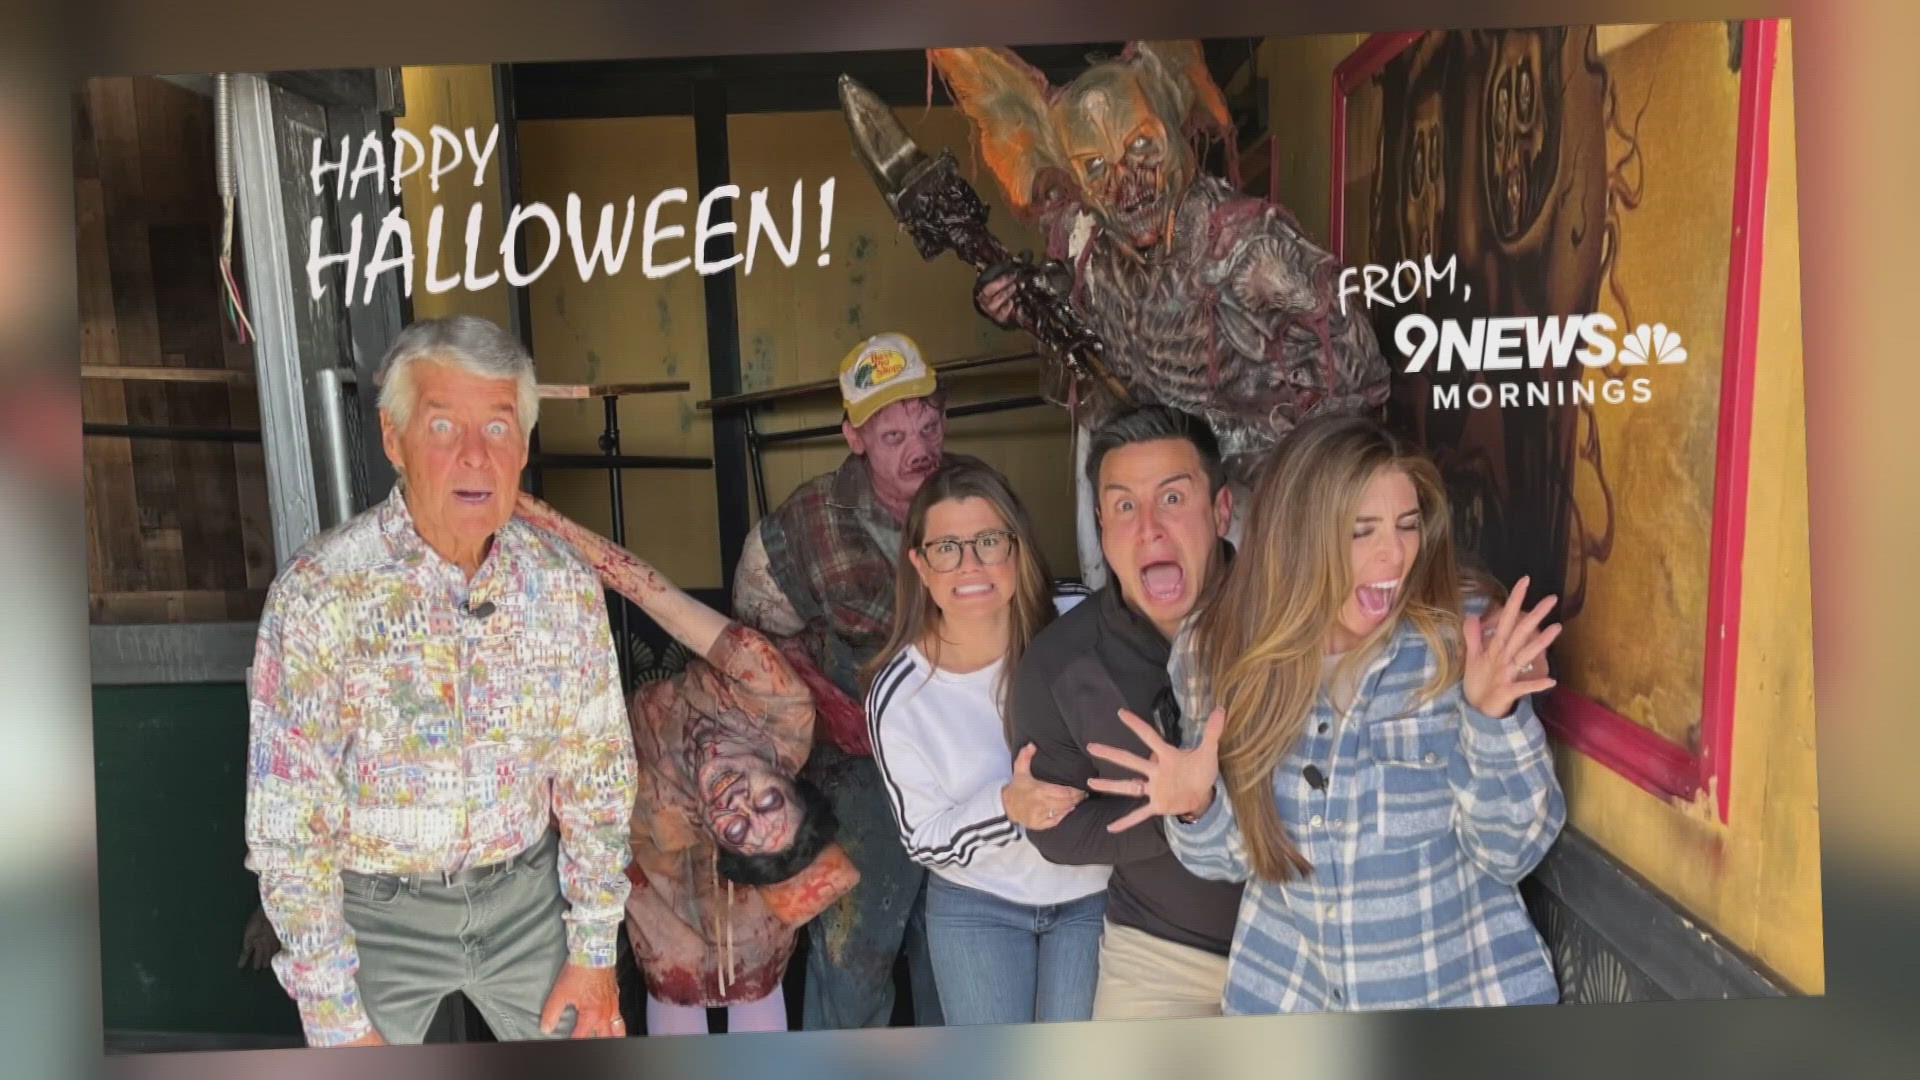 With Halloween just around the corner, the 9NEWS Morning team went to check out all the scares at the 13th Floor Haunted House.